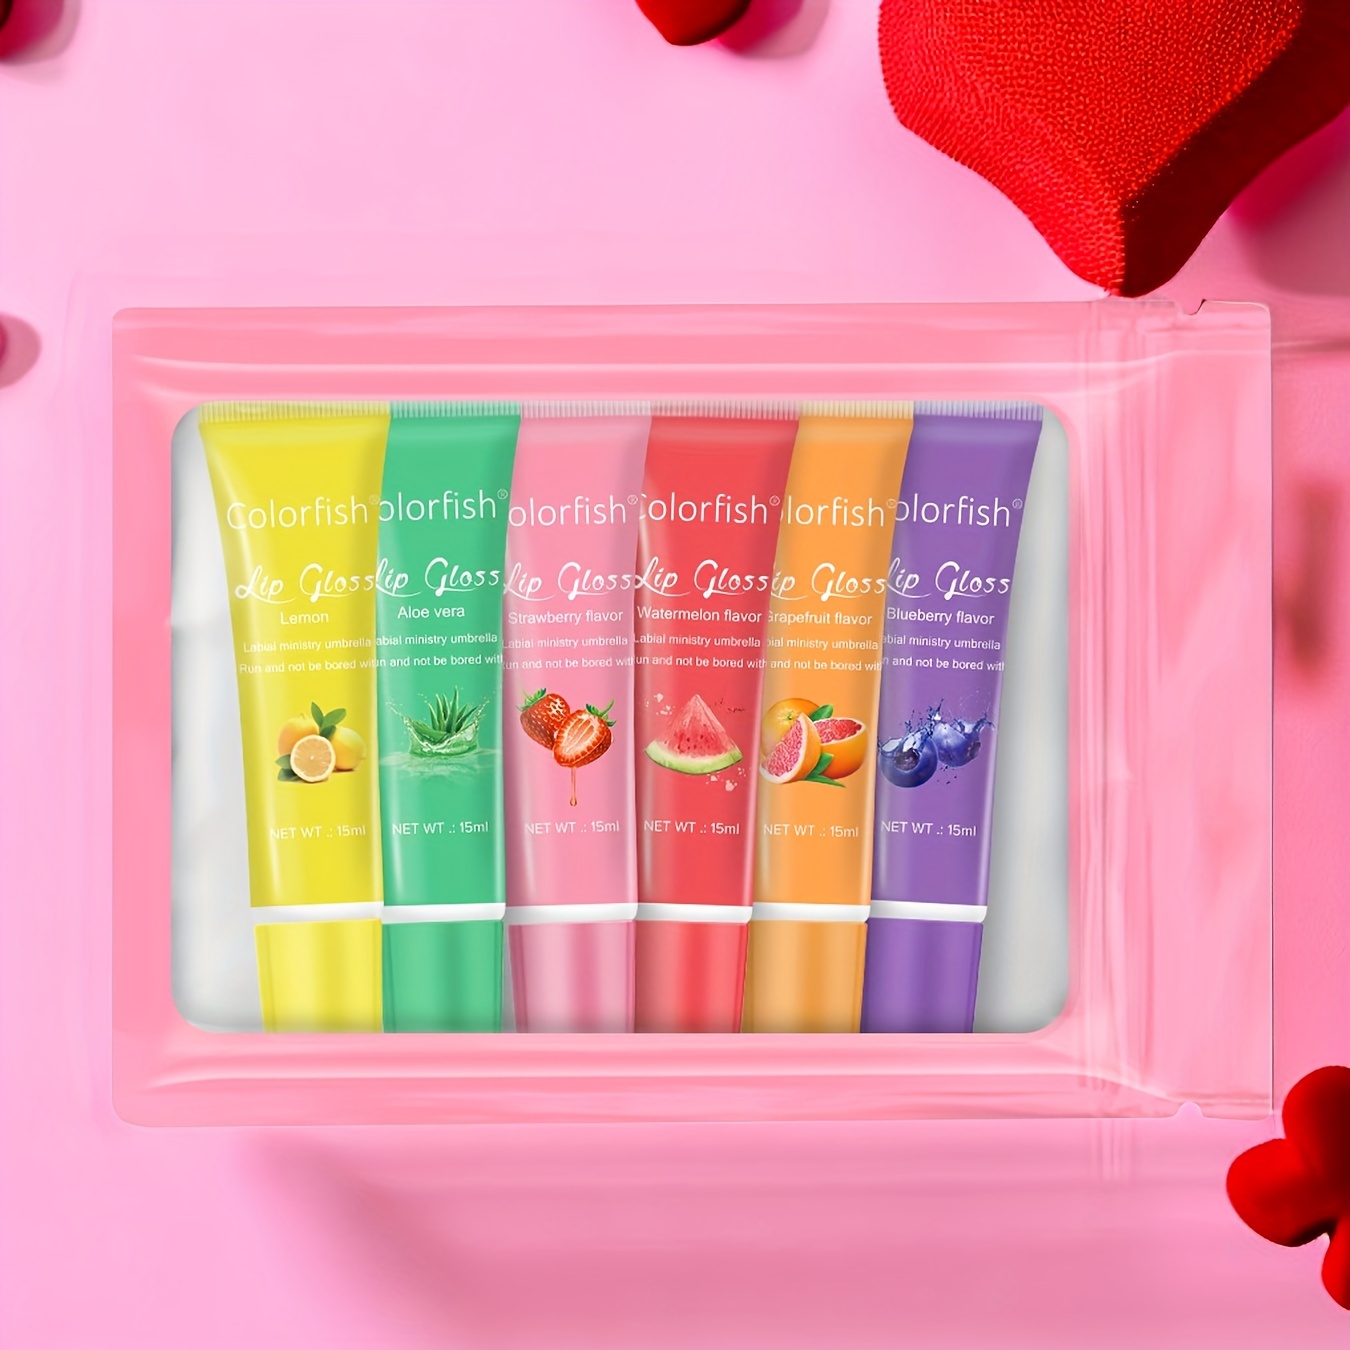 

6pcs Lip Gloss Set, 15ml/pc, 6 Kinds Of Fruit Flavor, Contains Hyaluronic Acid And Squalane, 24h Depth Moisturizing, Hydrating And Nourishing Lipstick Lip Glaze Lip Oil With Plant Squalane